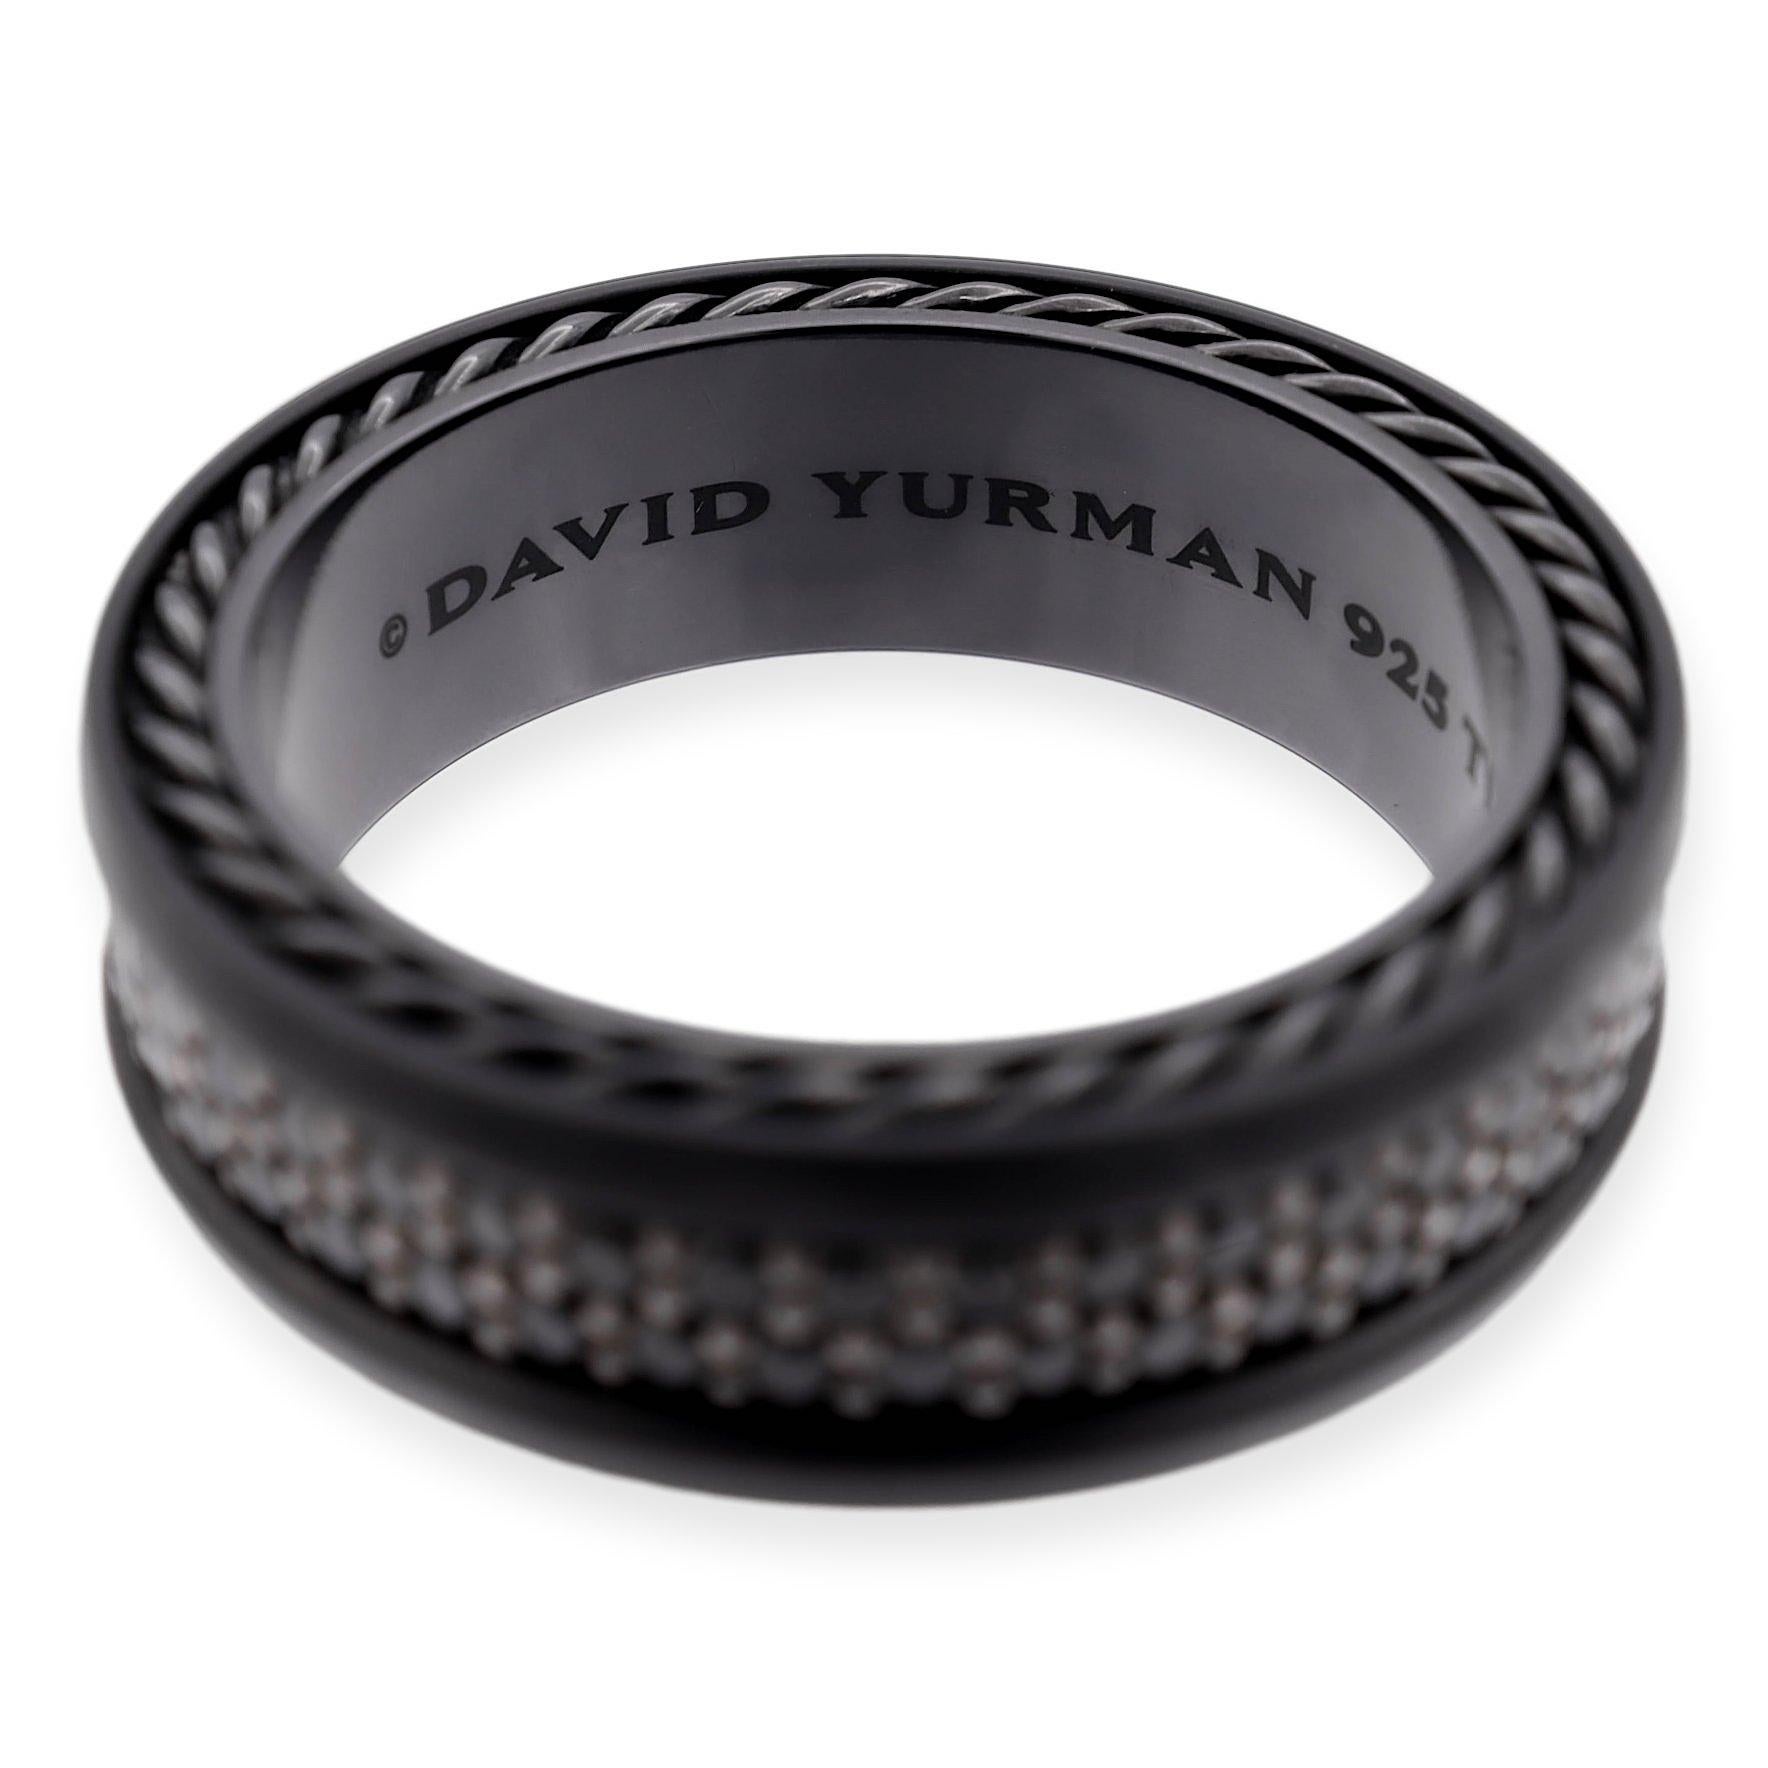 David Yurman Men's Band Ring from the Streamline collection: a fusion of titanium and silver, elegantly showcasing 2 rows of round black diamonds totaling 1.33 carats. This hallmark piece, weighing 8.40 grams, bears the signature ©DAVID YURMAN 925